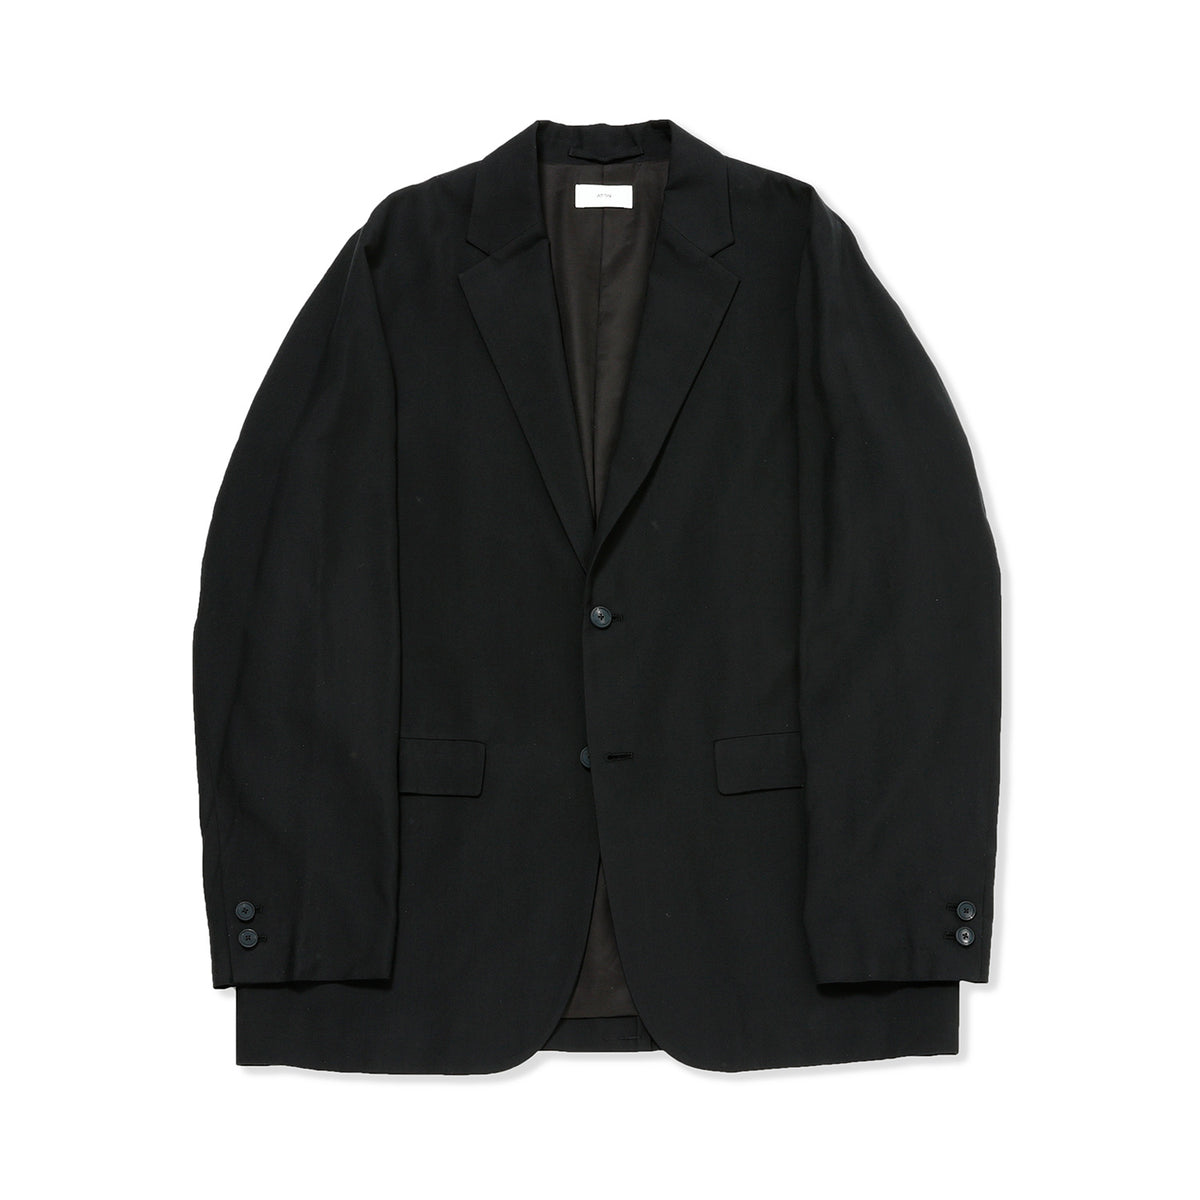 Nidom Silk Tailored Jacket - ATON (エイトン) - outer (アウター 